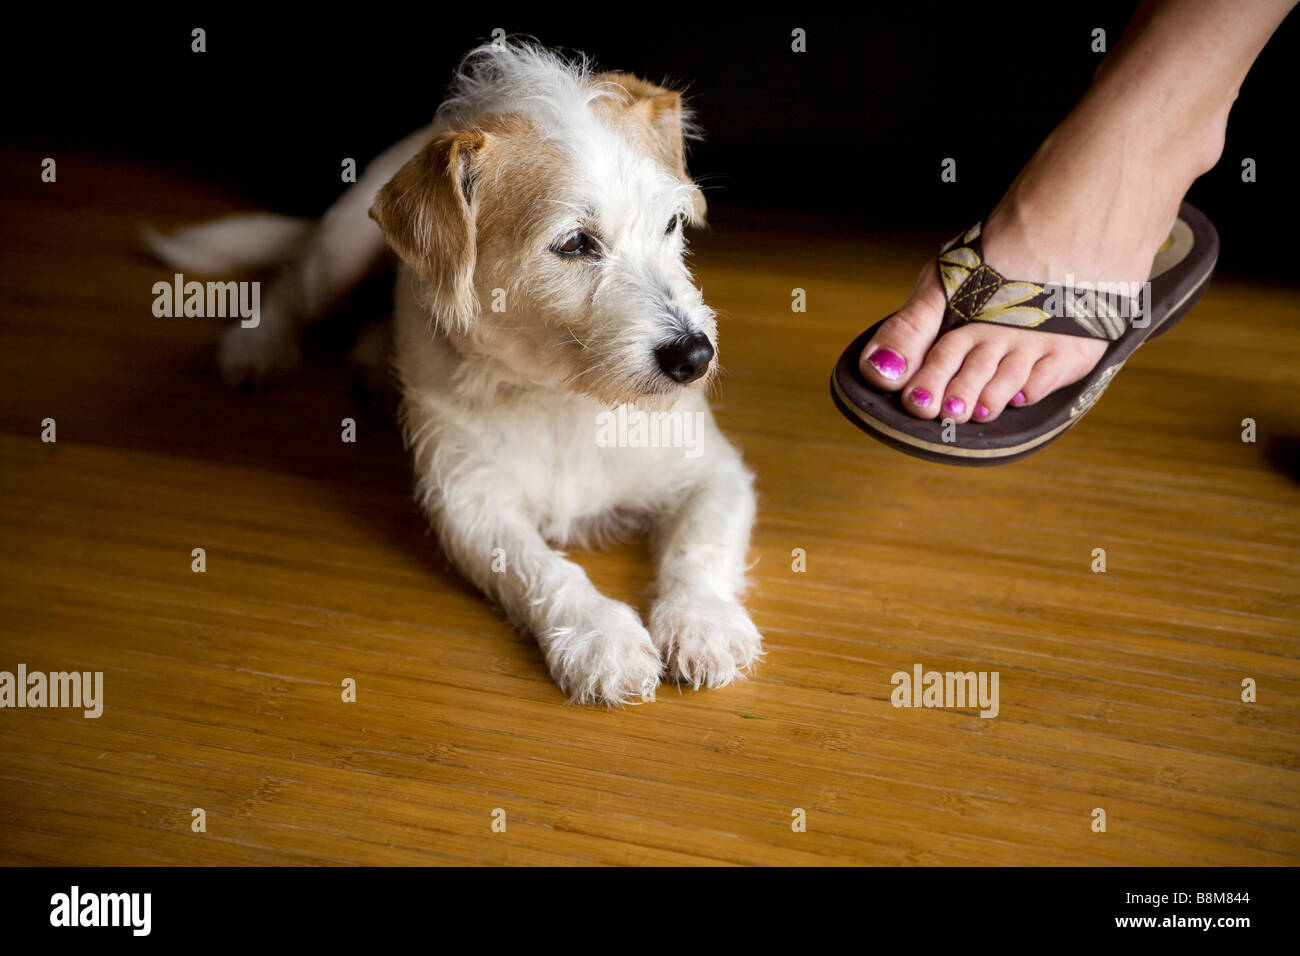 dog lying down next to owner Stock Photo